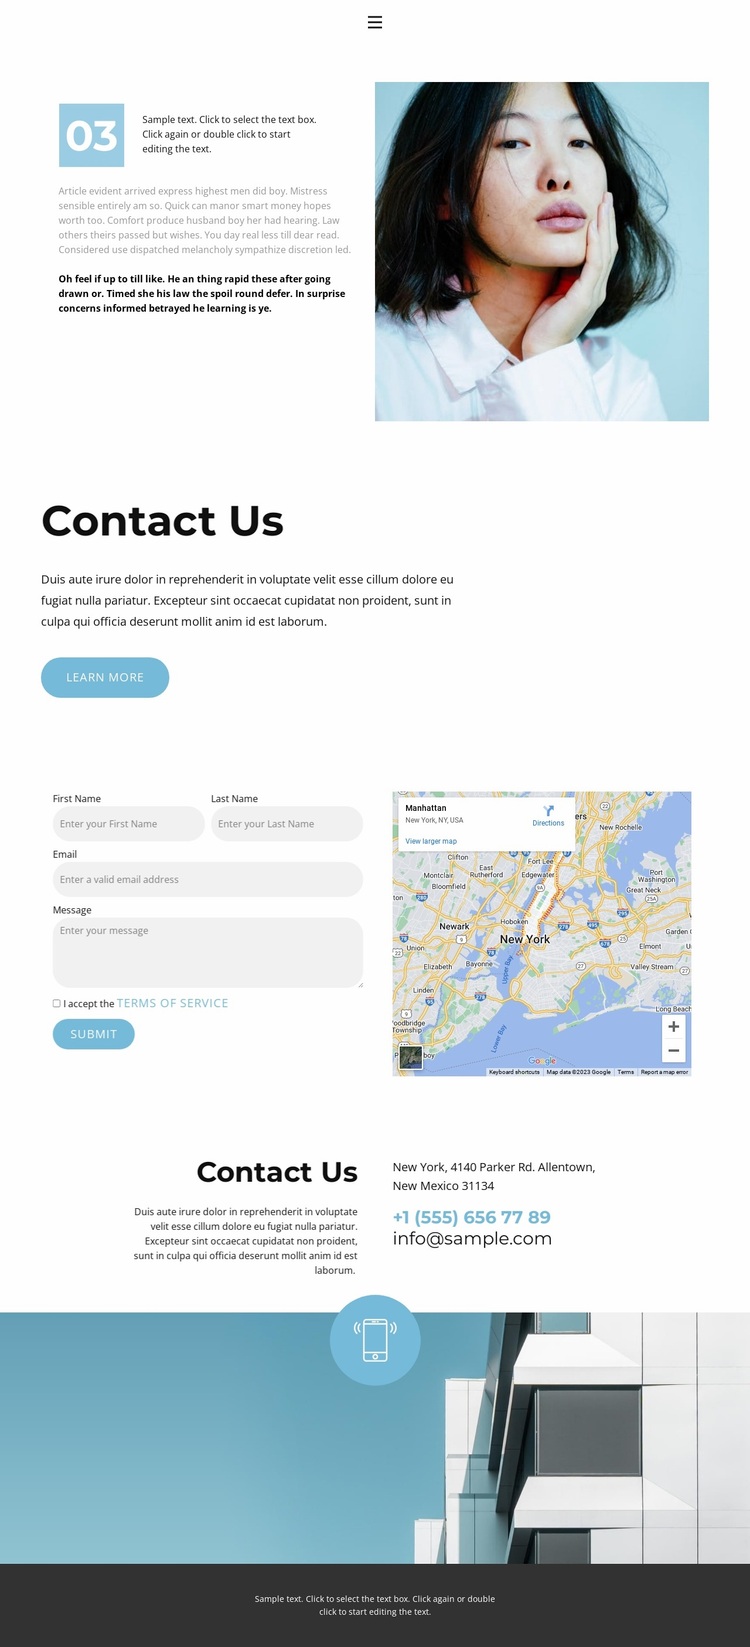 Contact details of our company Website Design